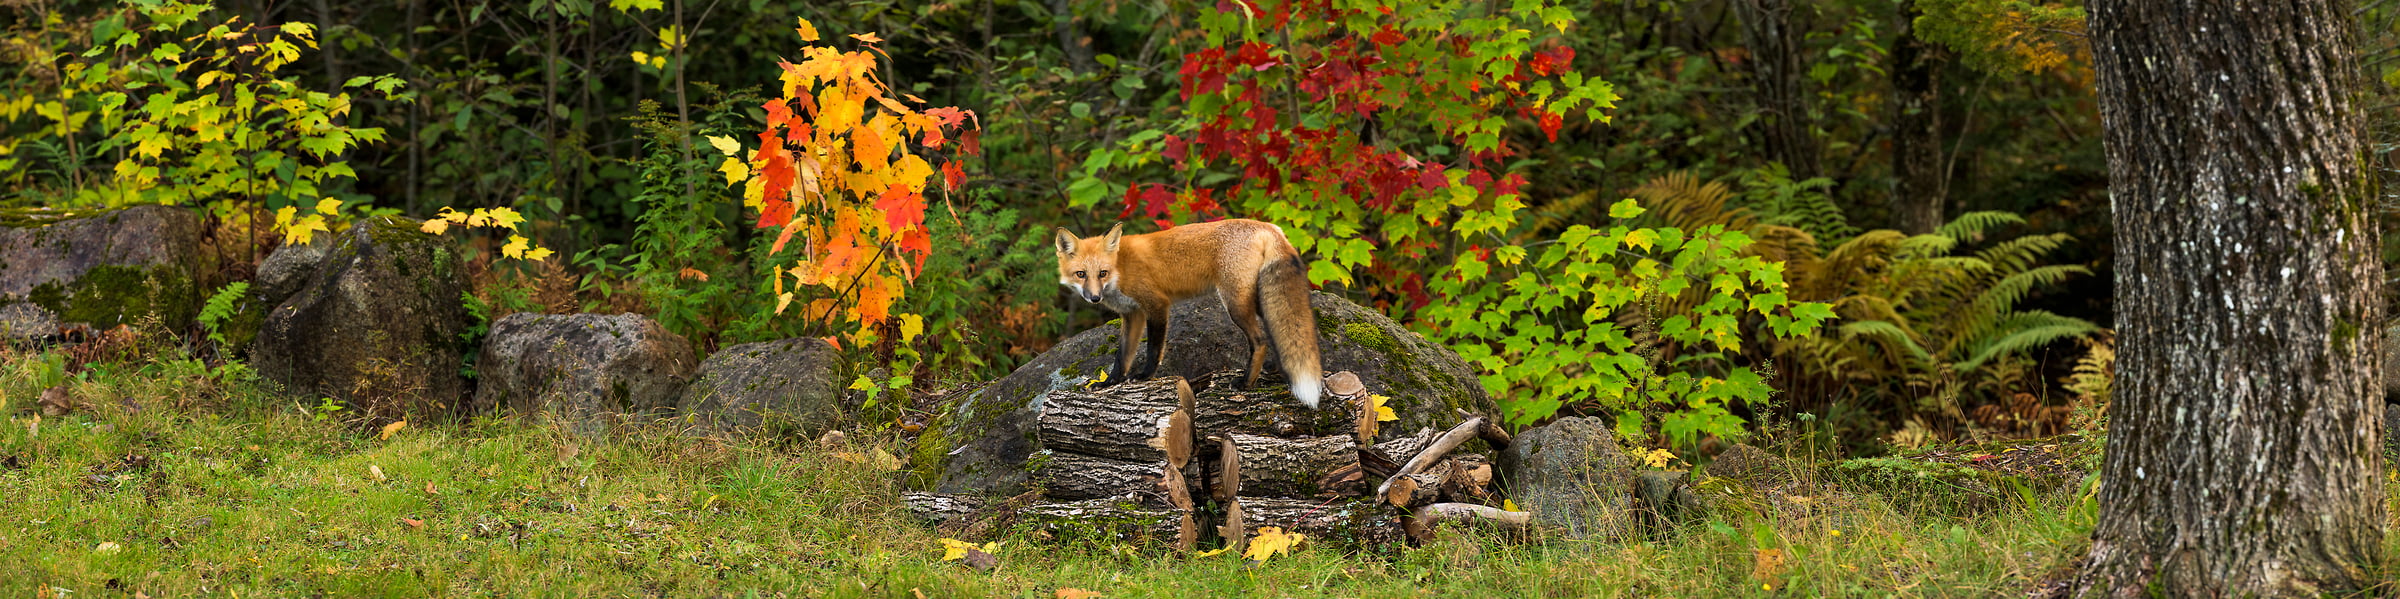 256 megapixels! A very high resolution, large-format VAST photo print of a fox in the woods; wildlife photograph created by Aaron Priest.